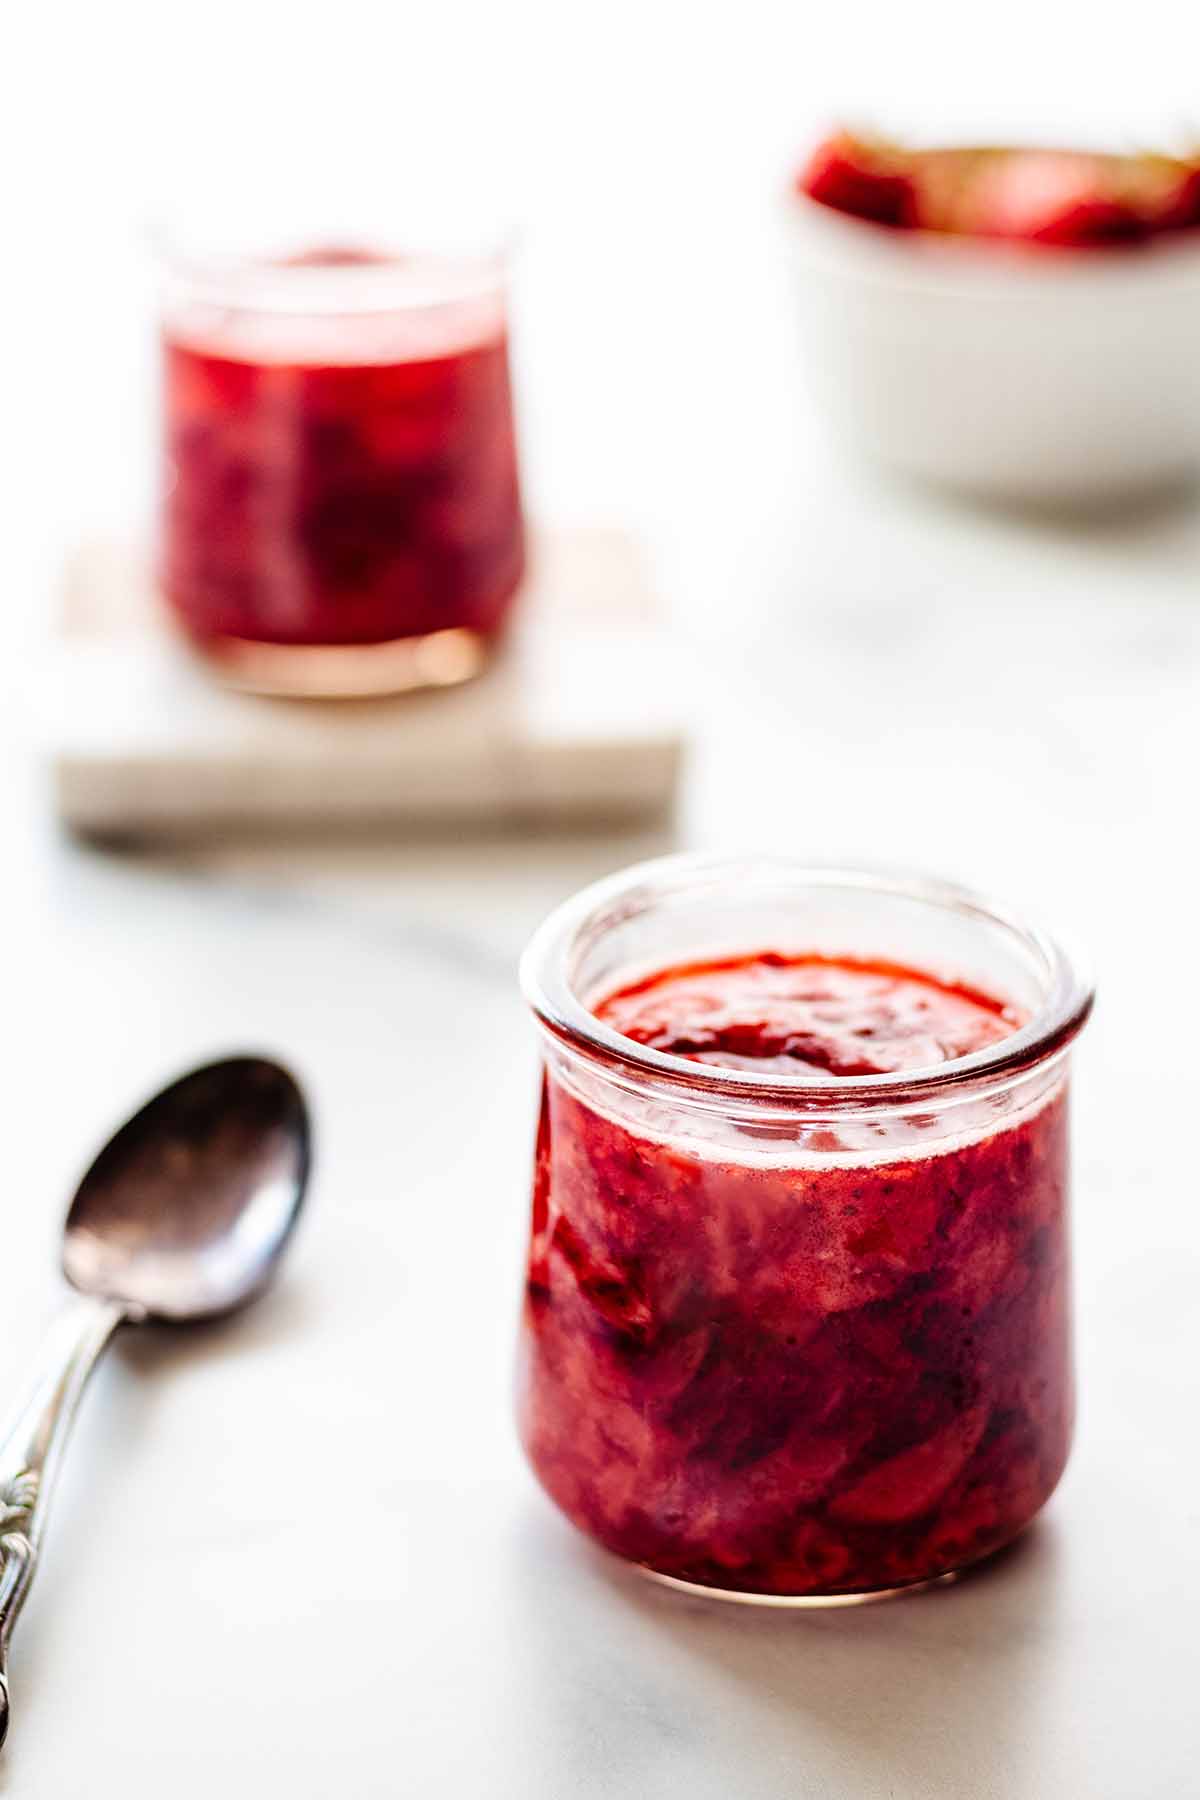 Two small jars of compote on a marble background with a spoon and small bowl of strawberries